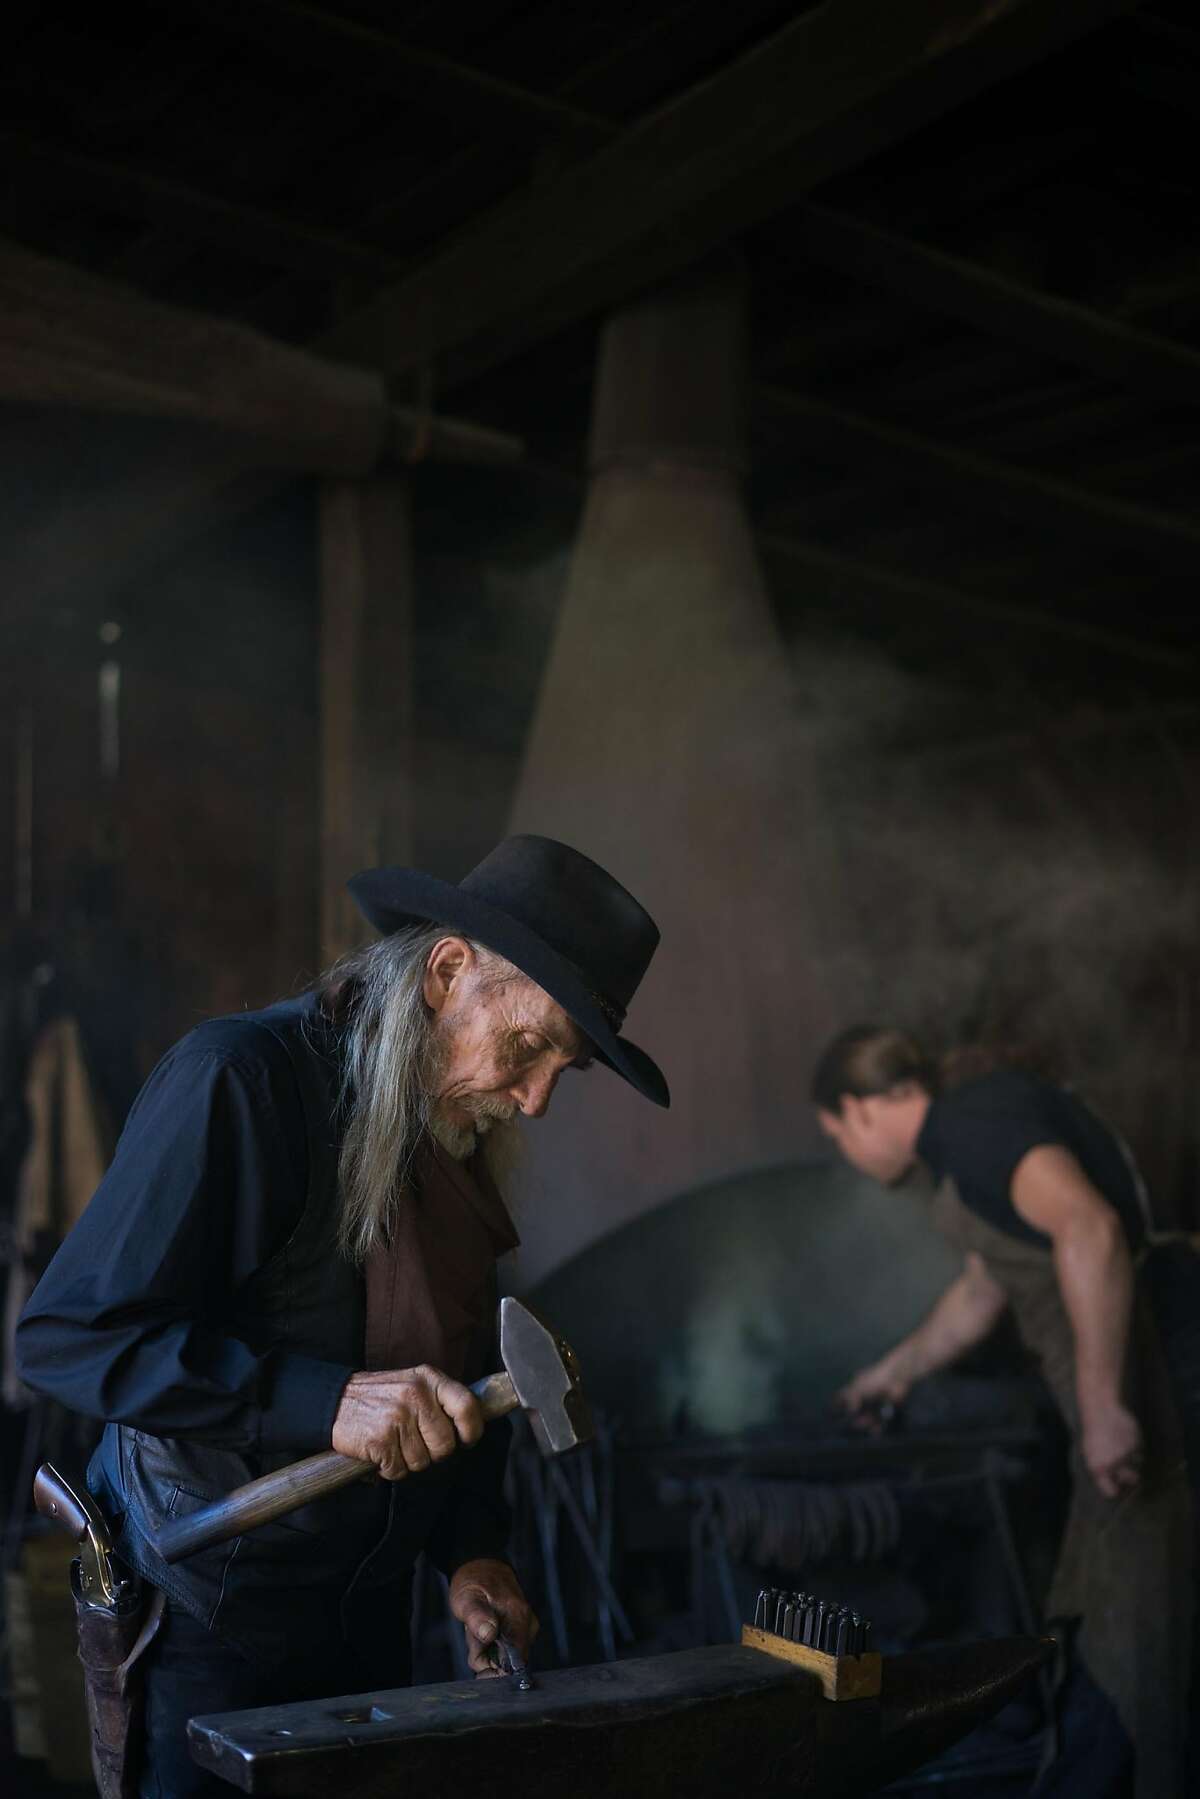 Mike Maciejewski hammers a small sword at the blacksmith shop at Columbia State Park in Columbia, Calif. on Friday, Oct. 9, 2015. Columbia has the largest number of gold rush-era buildings.